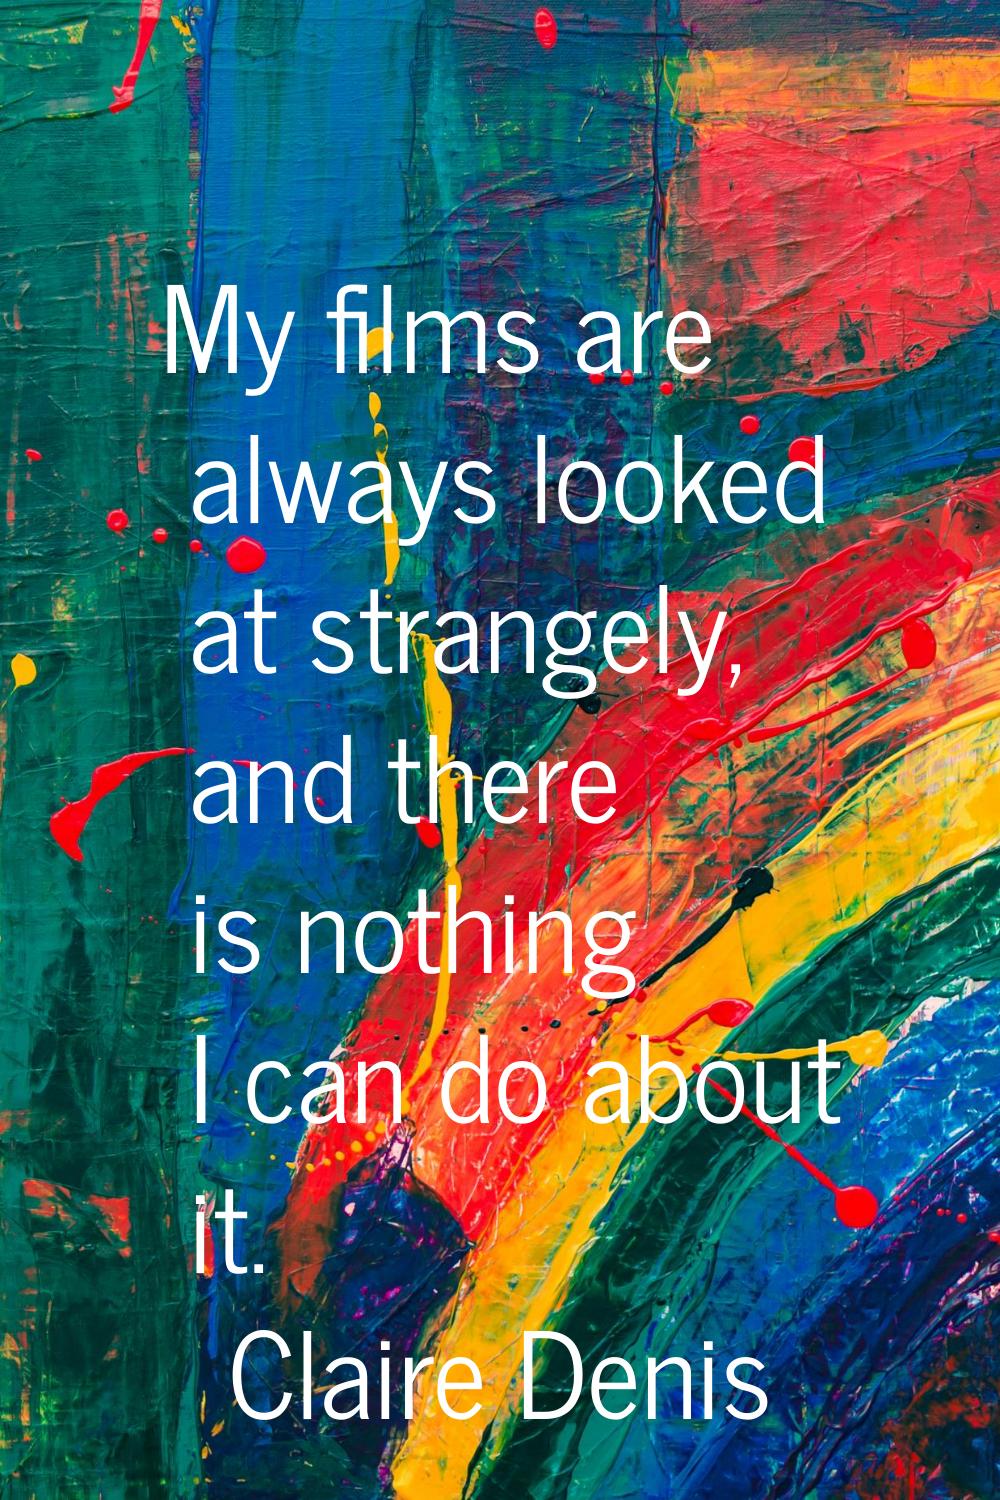 My films are always looked at strangely, and there is nothing I can do about it.